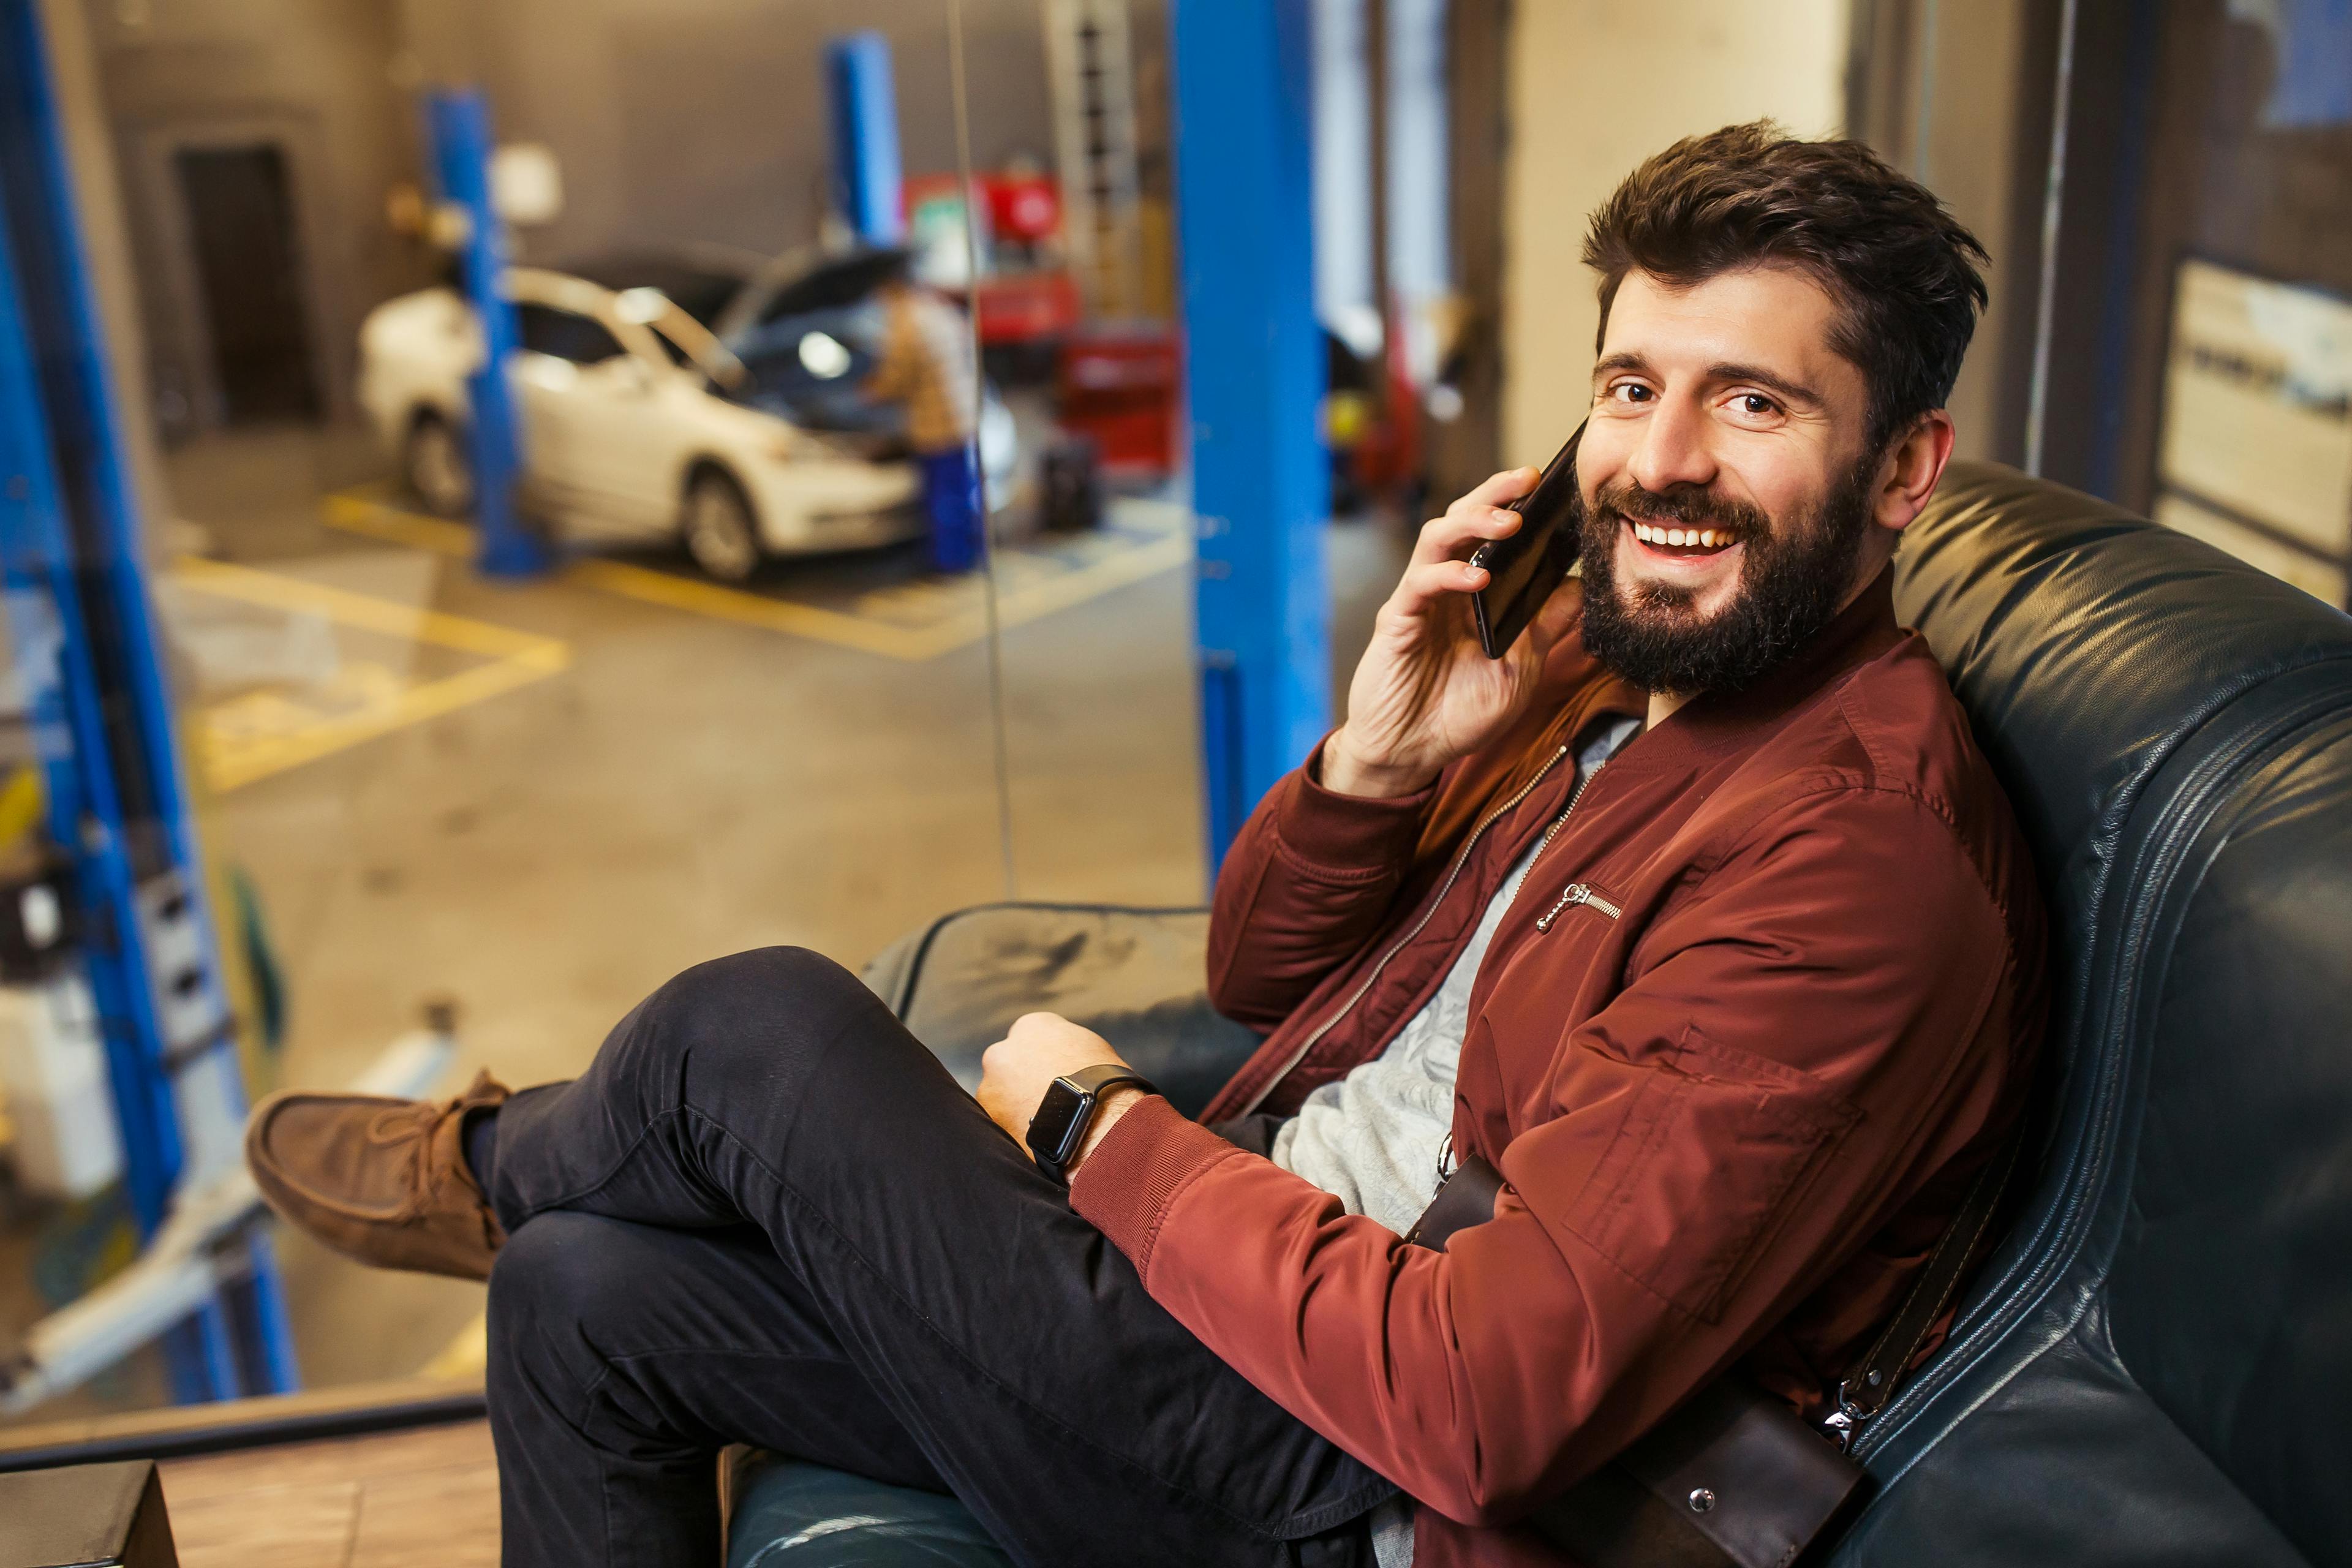 https://wsa-website-assets.s3.amazonaws.com/assets/images/cheerful-bearded-man-sitting-waiting-room-car-service-center-talking-smartphone-looking-camera.jpg